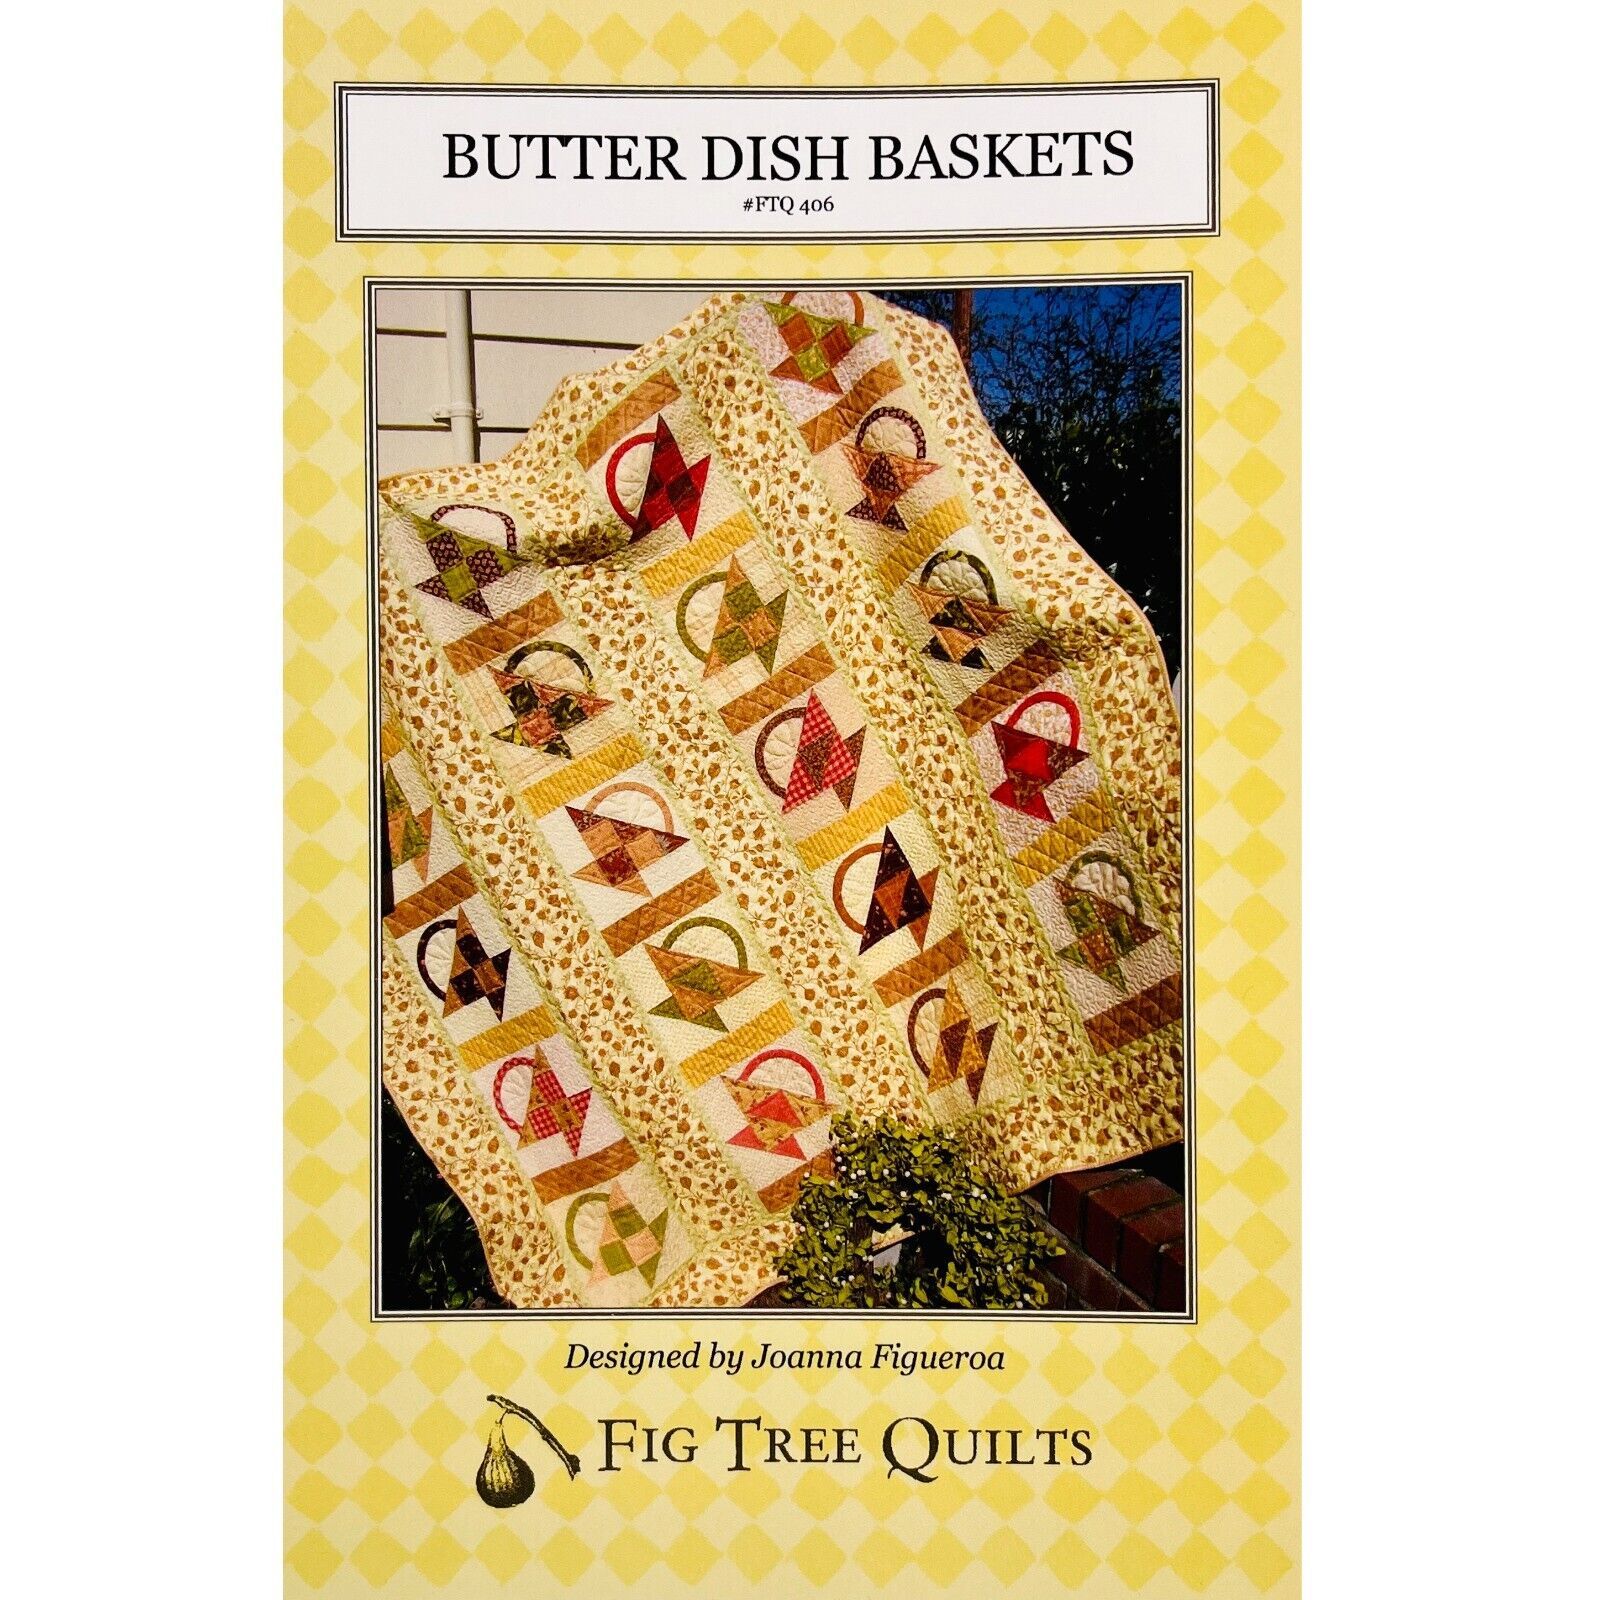 Primary image for Butter Dish Baskets Quilt PATTERN FTQ406 by Joanna Figueroa for Fig Tree Quilts